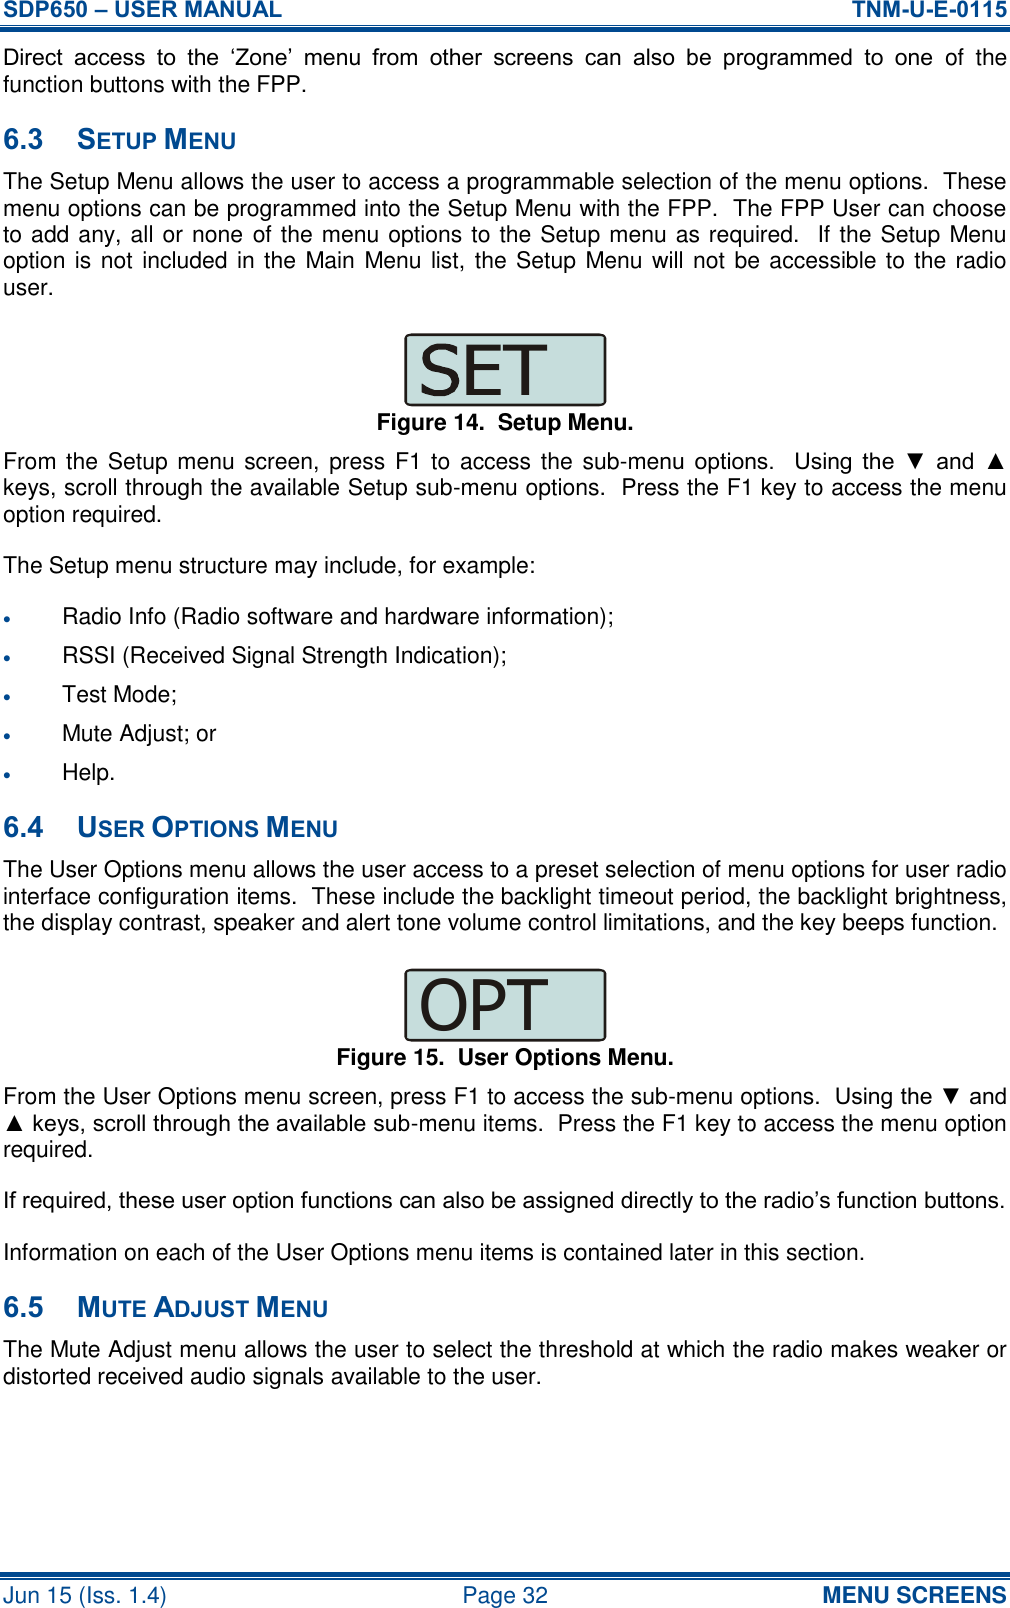 SDP650 – USER MANUAL  TNM-U-E-0115 Jun 15 (Iss. 1.4)  Page 32 MENU SCREENS Direct  access  to  the  ‘Zone’  menu  from  other  screens  can  also  be  programmed  to  one  of  the function buttons with the FPP. 6.3 SETUP MENU The Setup Menu allows the user to access a programmable selection of the menu options.  These menu options can be programmed into the Setup Menu with the FPP.  The FPP User can choose to add any, all or none of the menu options to the Setup menu as required.  If the Setup Menu option is not  included in the Main Menu list, the Setup Menu will not be accessible to the radio user. Figure 14.  Setup Menu. From the Setup menu screen,  press F1 to access the sub-menu  options.    Using  the  ▼  and  ▲ keys, scroll through the available Setup sub-menu options.  Press the F1 key to access the menu option required. The Setup menu structure may include, for example:  Radio Info (Radio software and hardware information);  RSSI (Received Signal Strength Indication);  Test Mode;  Mute Adjust; or  Help. 6.4 USER OPTIONS MENU The User Options menu allows the user access to a preset selection of menu options for user radio interface configuration items.  These include the backlight timeout period, the backlight brightness, the display contrast, speaker and alert tone volume control limitations, and the key beeps function. Figure 15.  User Options Menu. From the User Options menu screen, press F1 to access the sub-menu options.  Using the ▼ and ▲ keys, scroll through the available sub-menu items.  Press the F1 key to access the menu option required. If required, these user option functions can also be assigned directly to the radio’s function buttons. Information on each of the User Options menu items is contained later in this section. 6.5 MUTE ADJUST MENU The Mute Adjust menu allows the user to select the threshold at which the radio makes weaker or distorted received audio signals available to the user. OPT